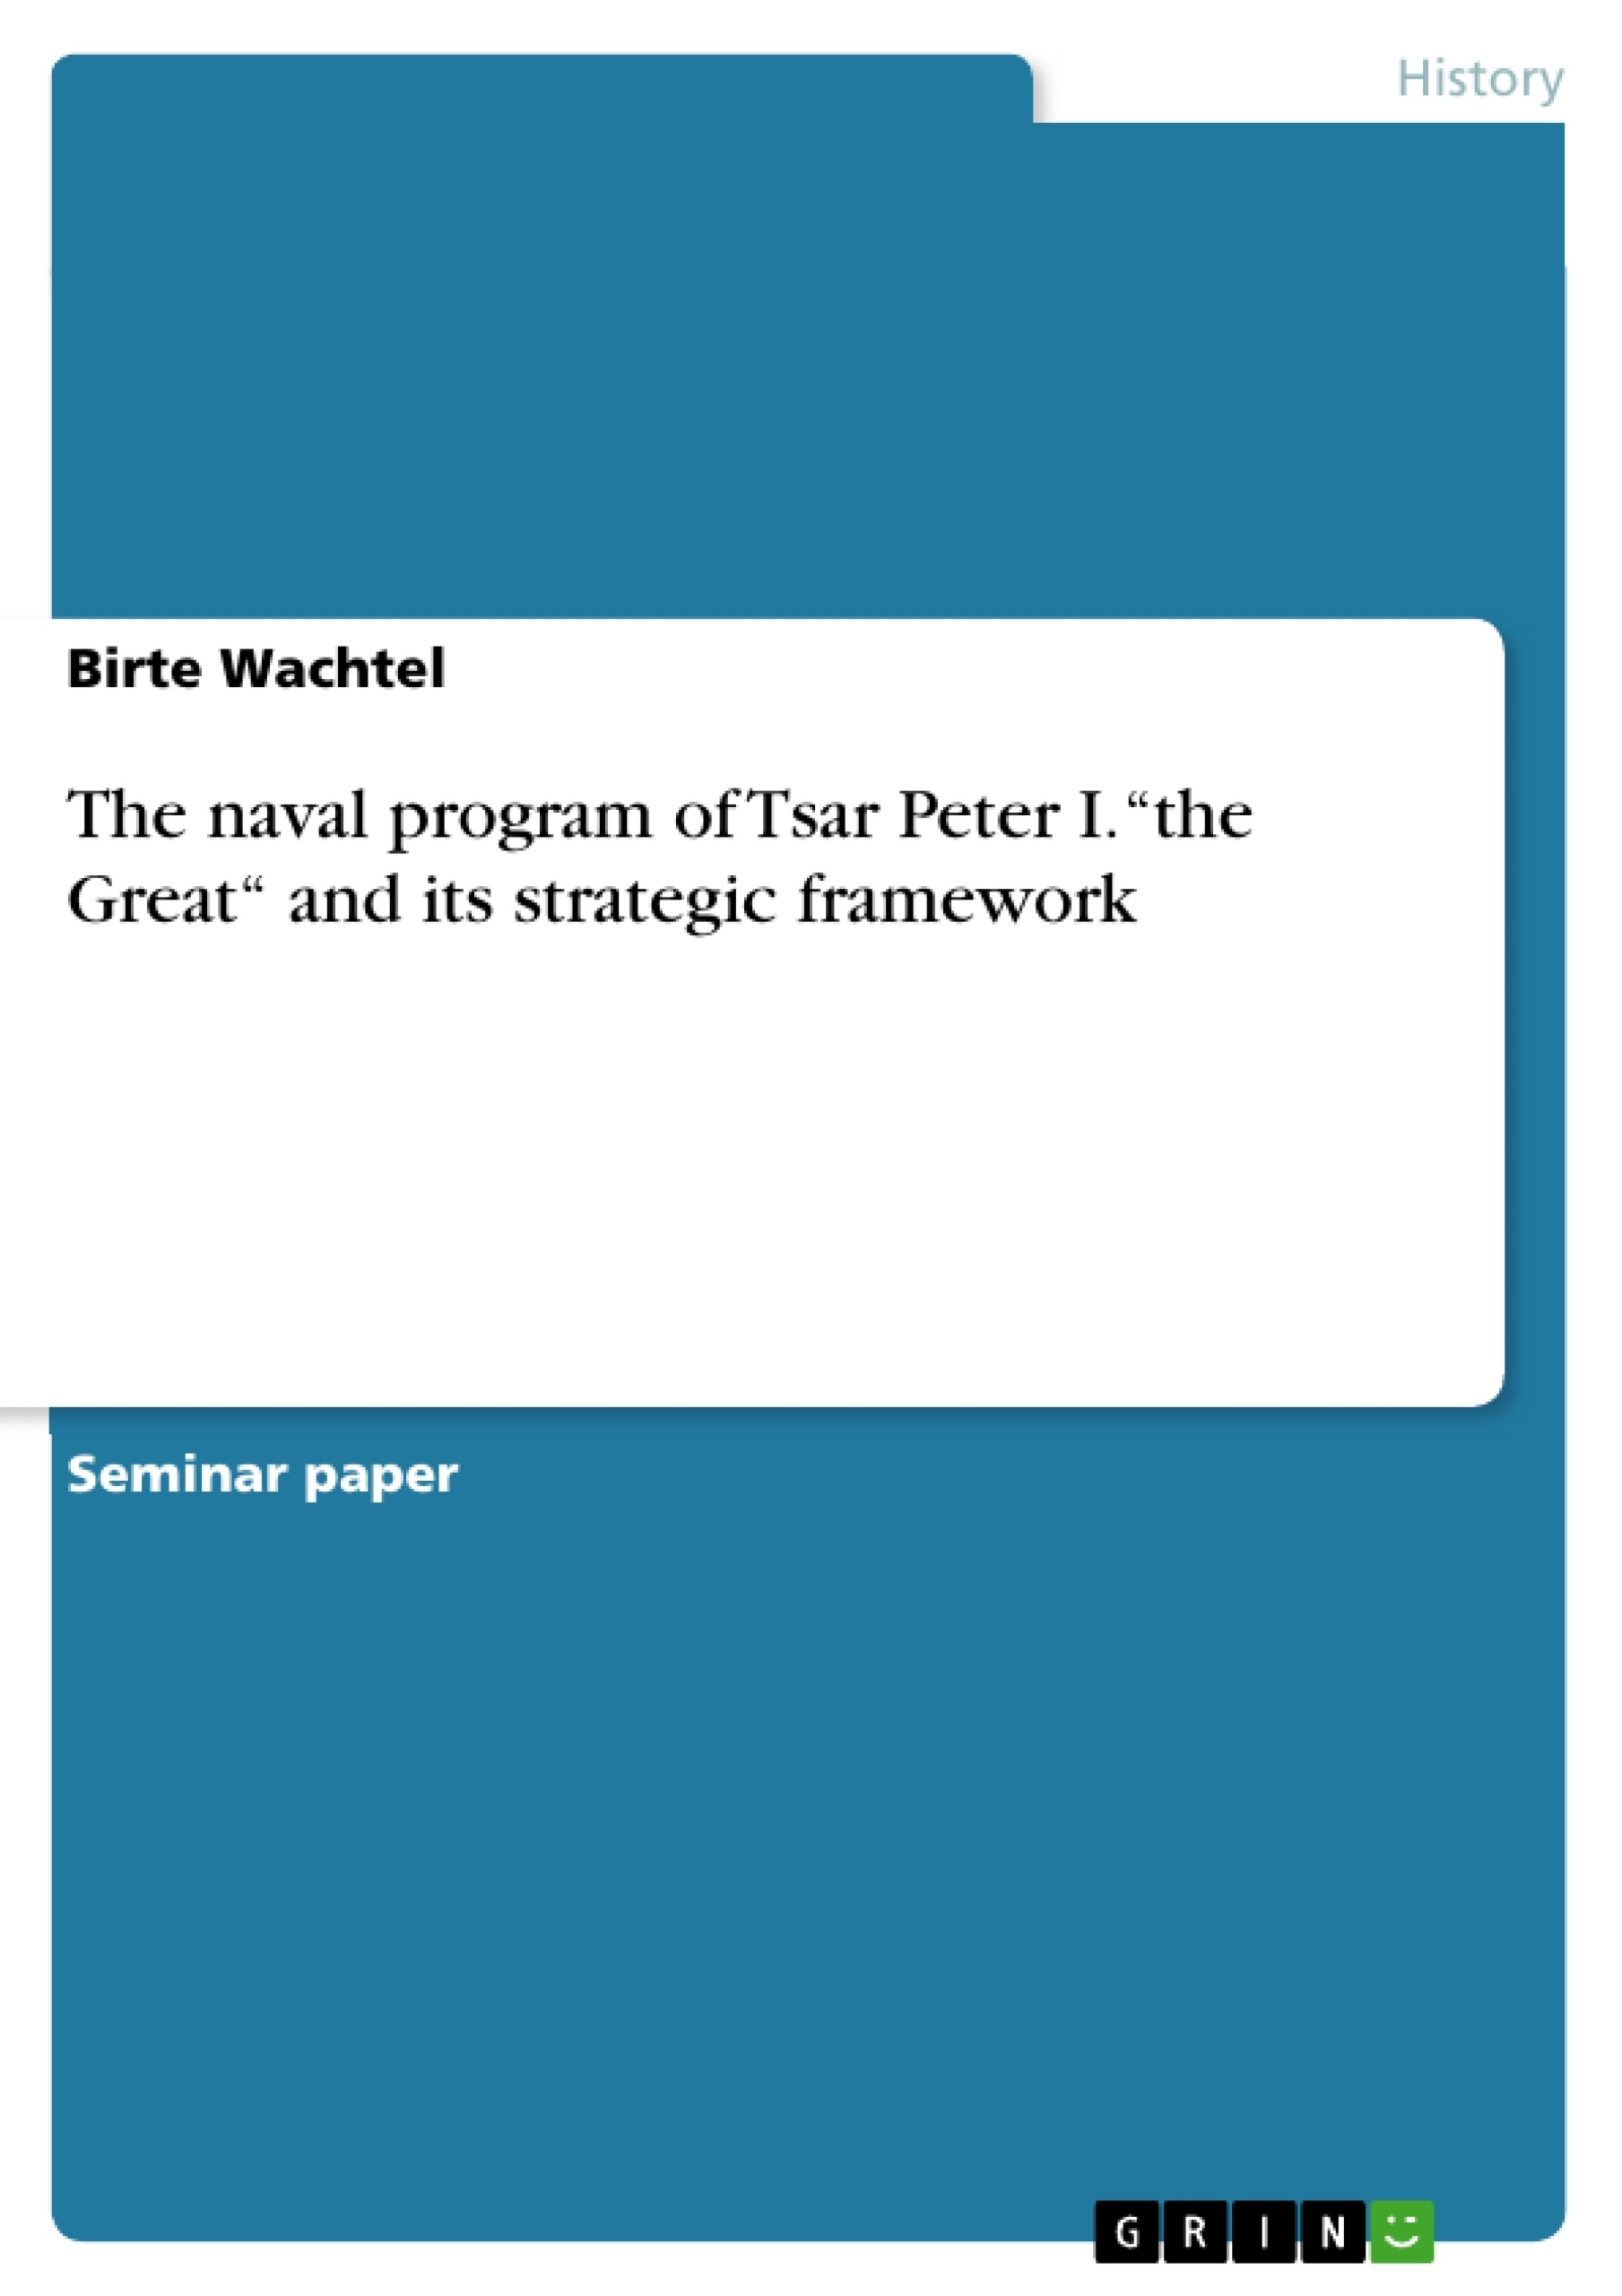 Titre: The naval program of Tsar Peter I. “the Great“ and its strategic framework